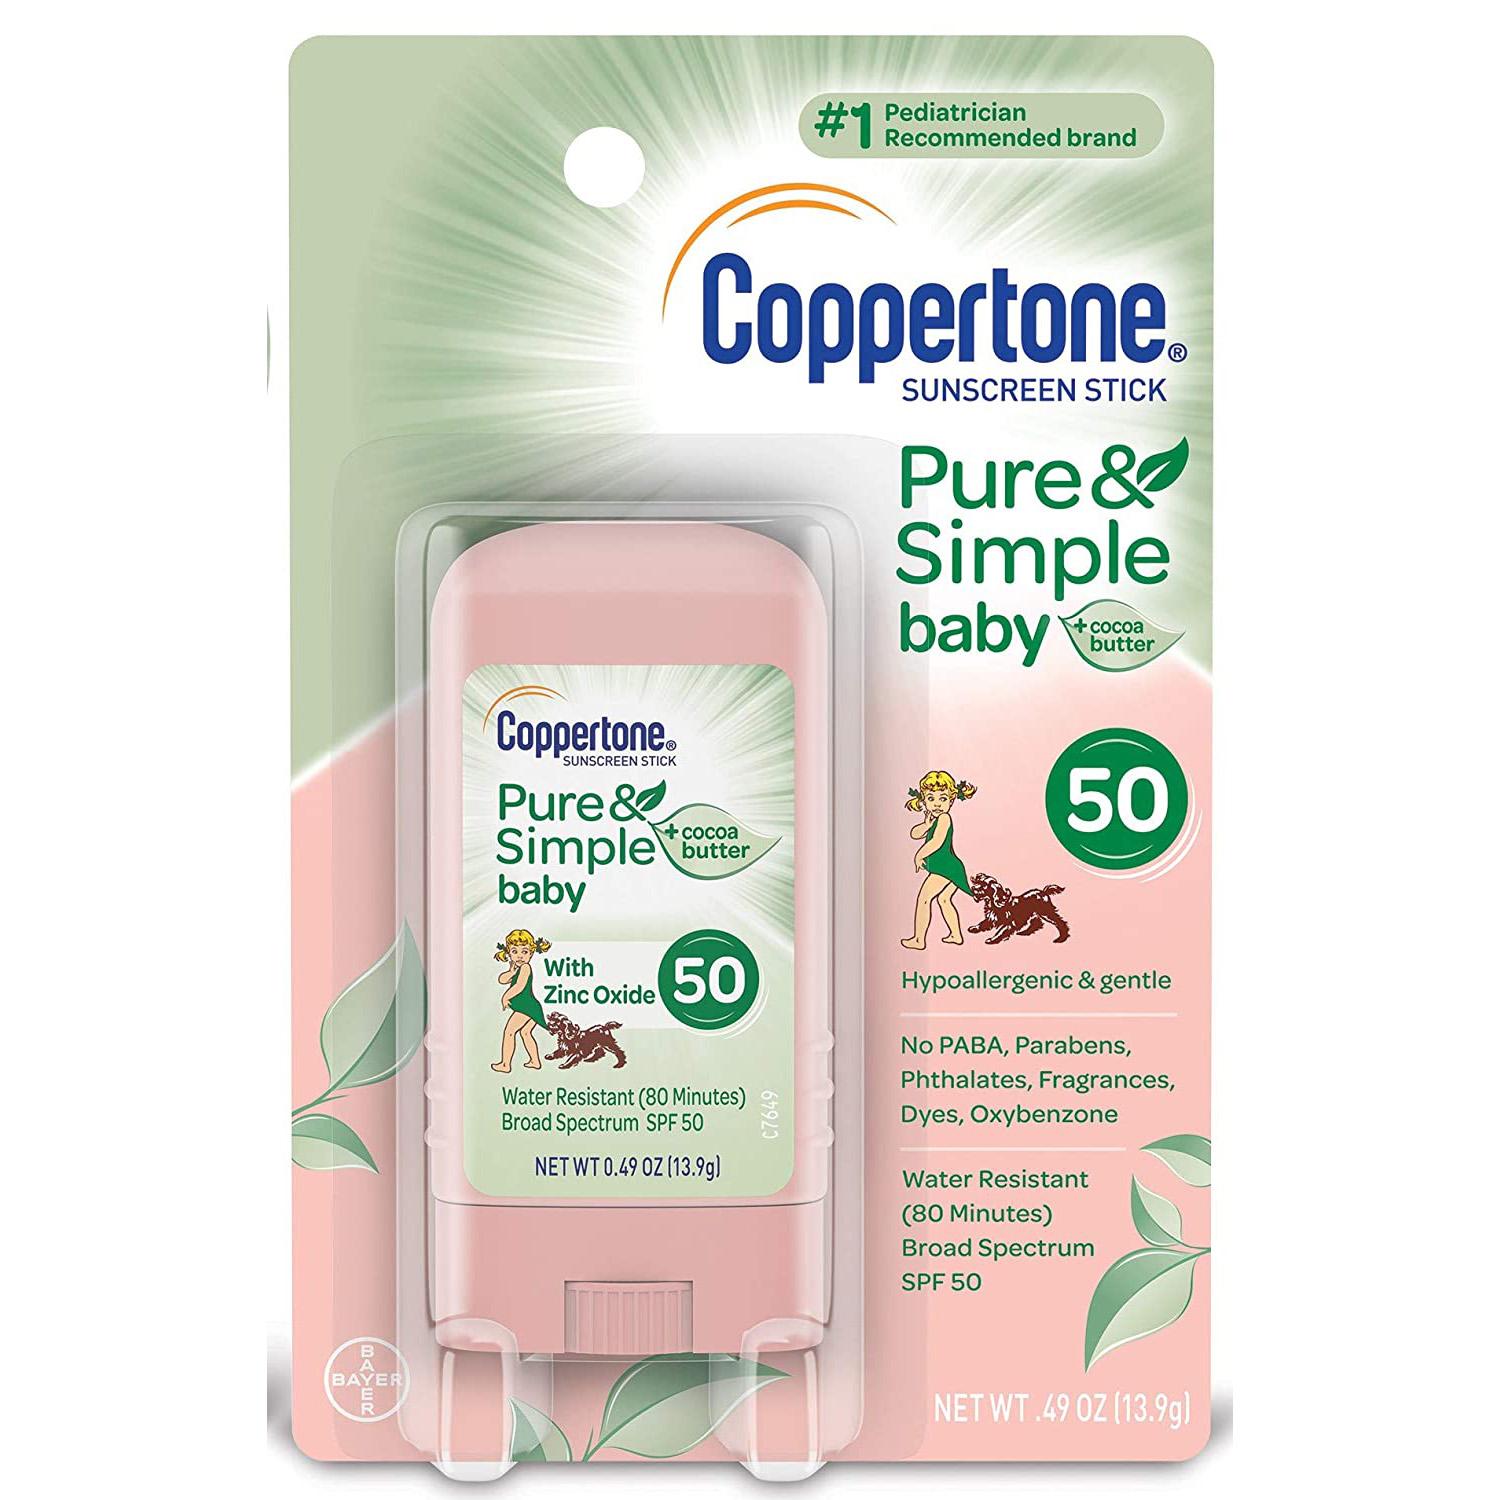 Coppertone Pure and Simple Baby SPF 50 Sunscreen Stick for $3.08 Shipped